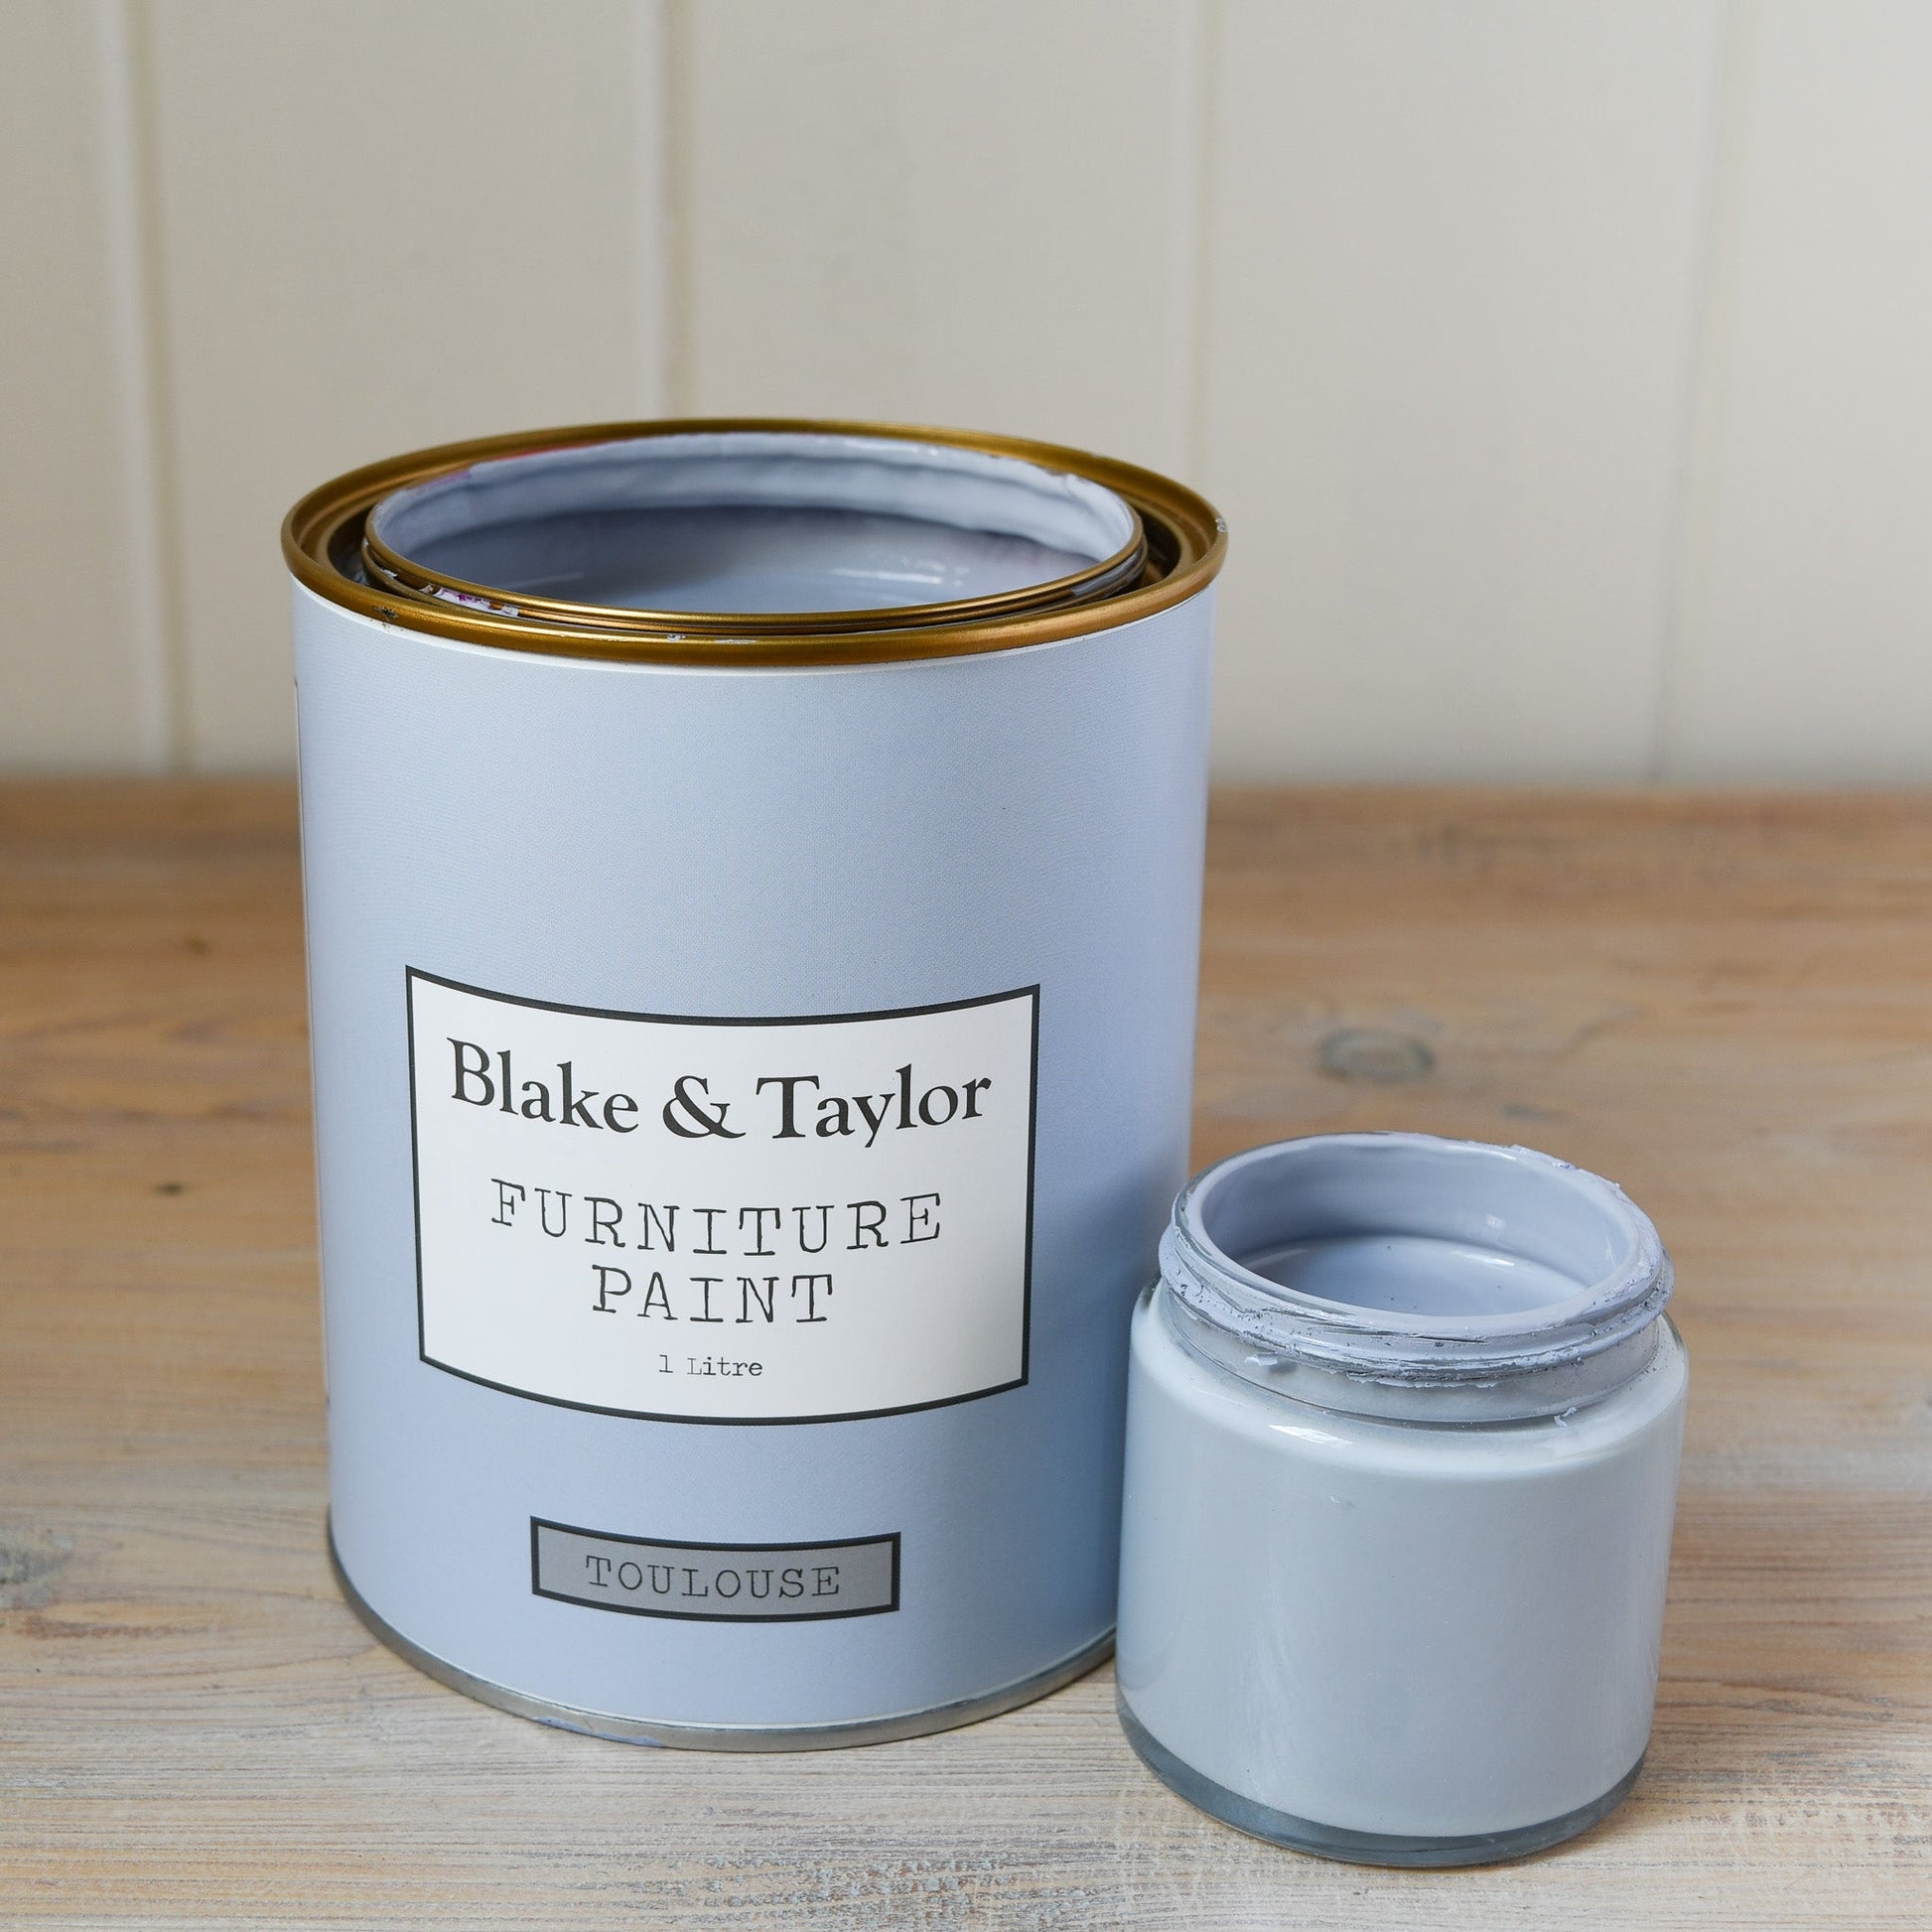 Blake & Taylor Chalk Furniture Paint 1 litre and 120ml pot of Toulouse